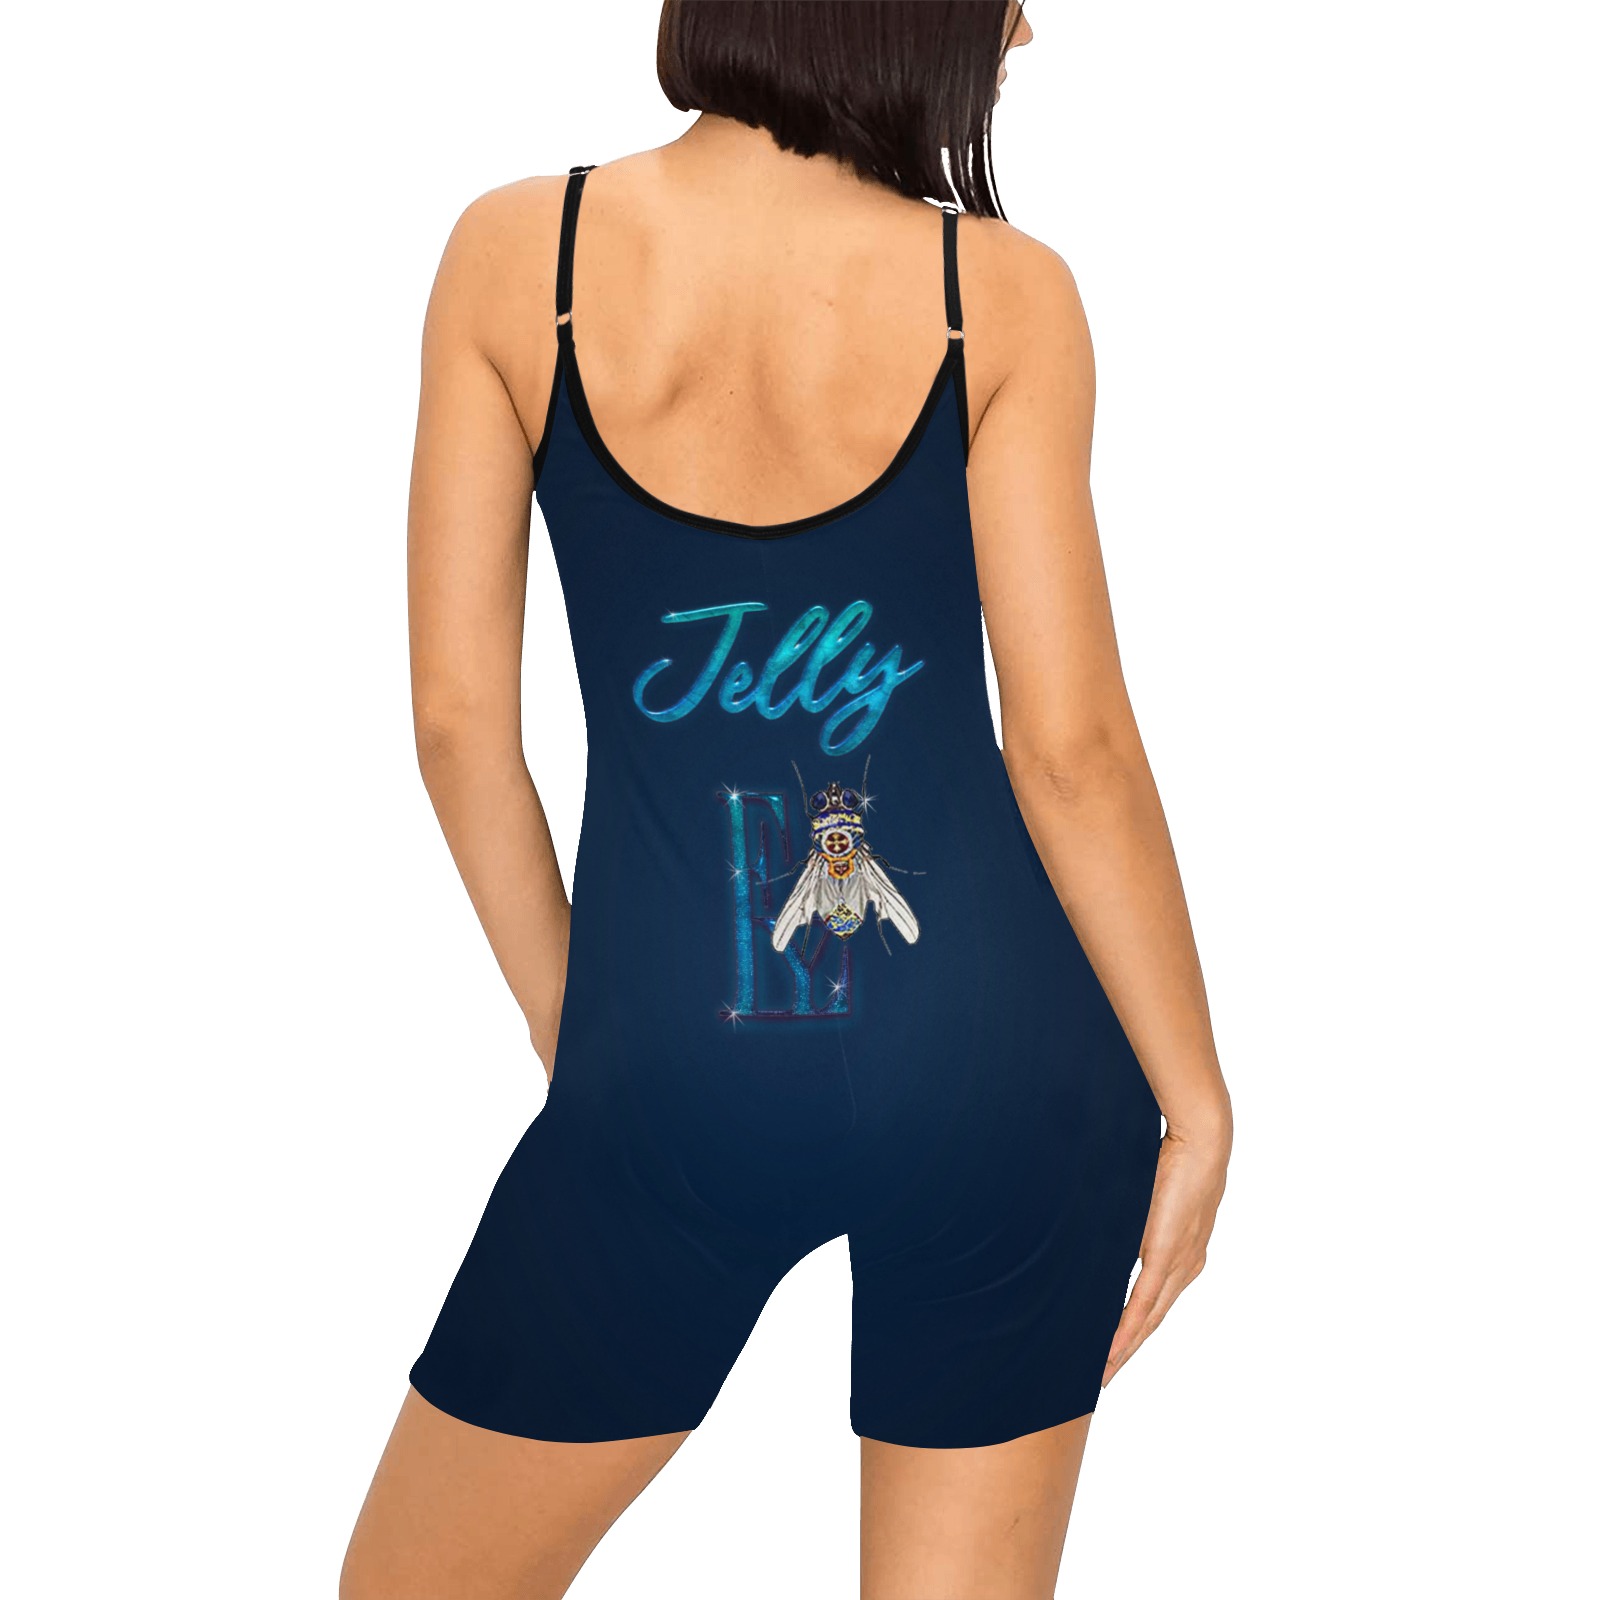 Jelly Collectable Fly Women's Short Yoga Bodysuit